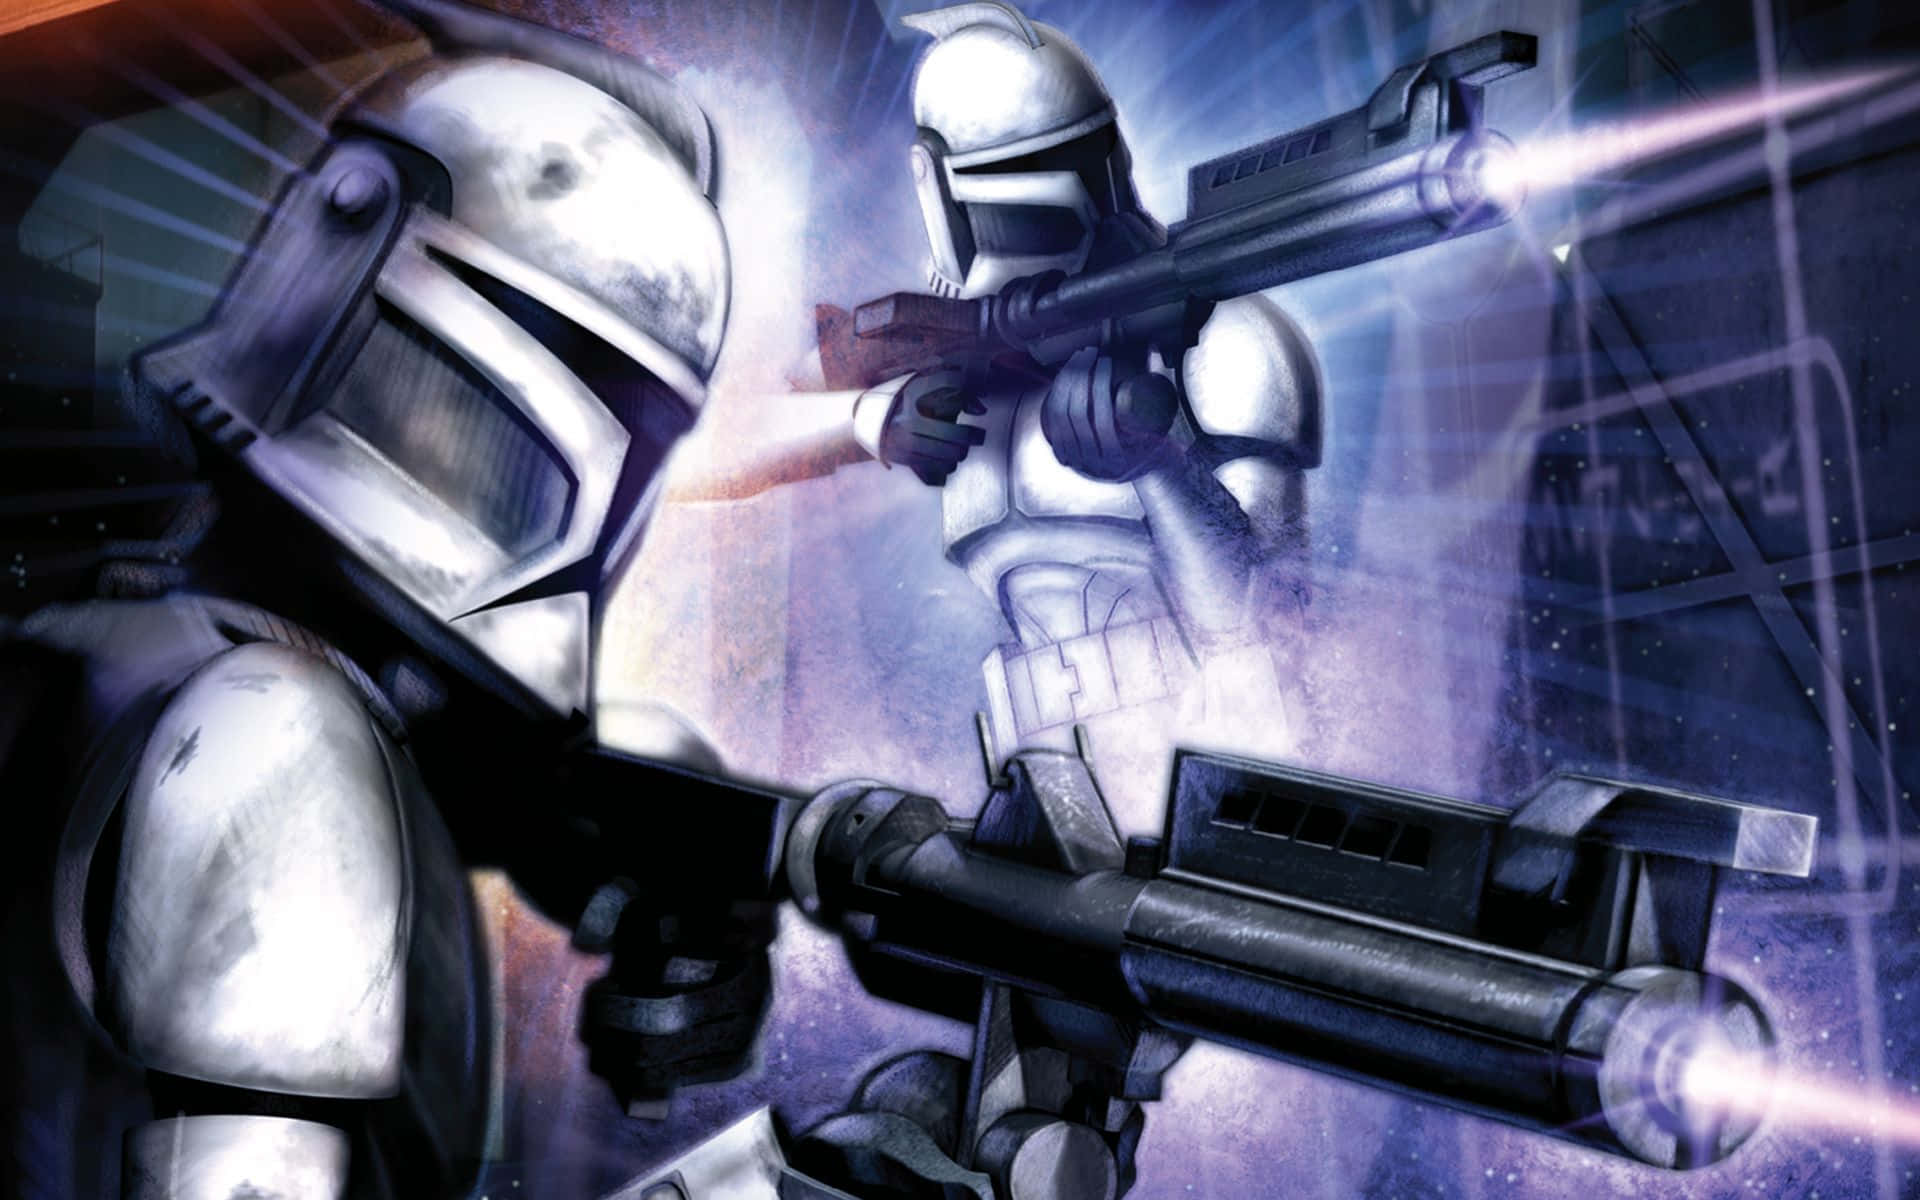 A Group Of Star Wars Clone Troopers March Across A Hostile Desert. Background